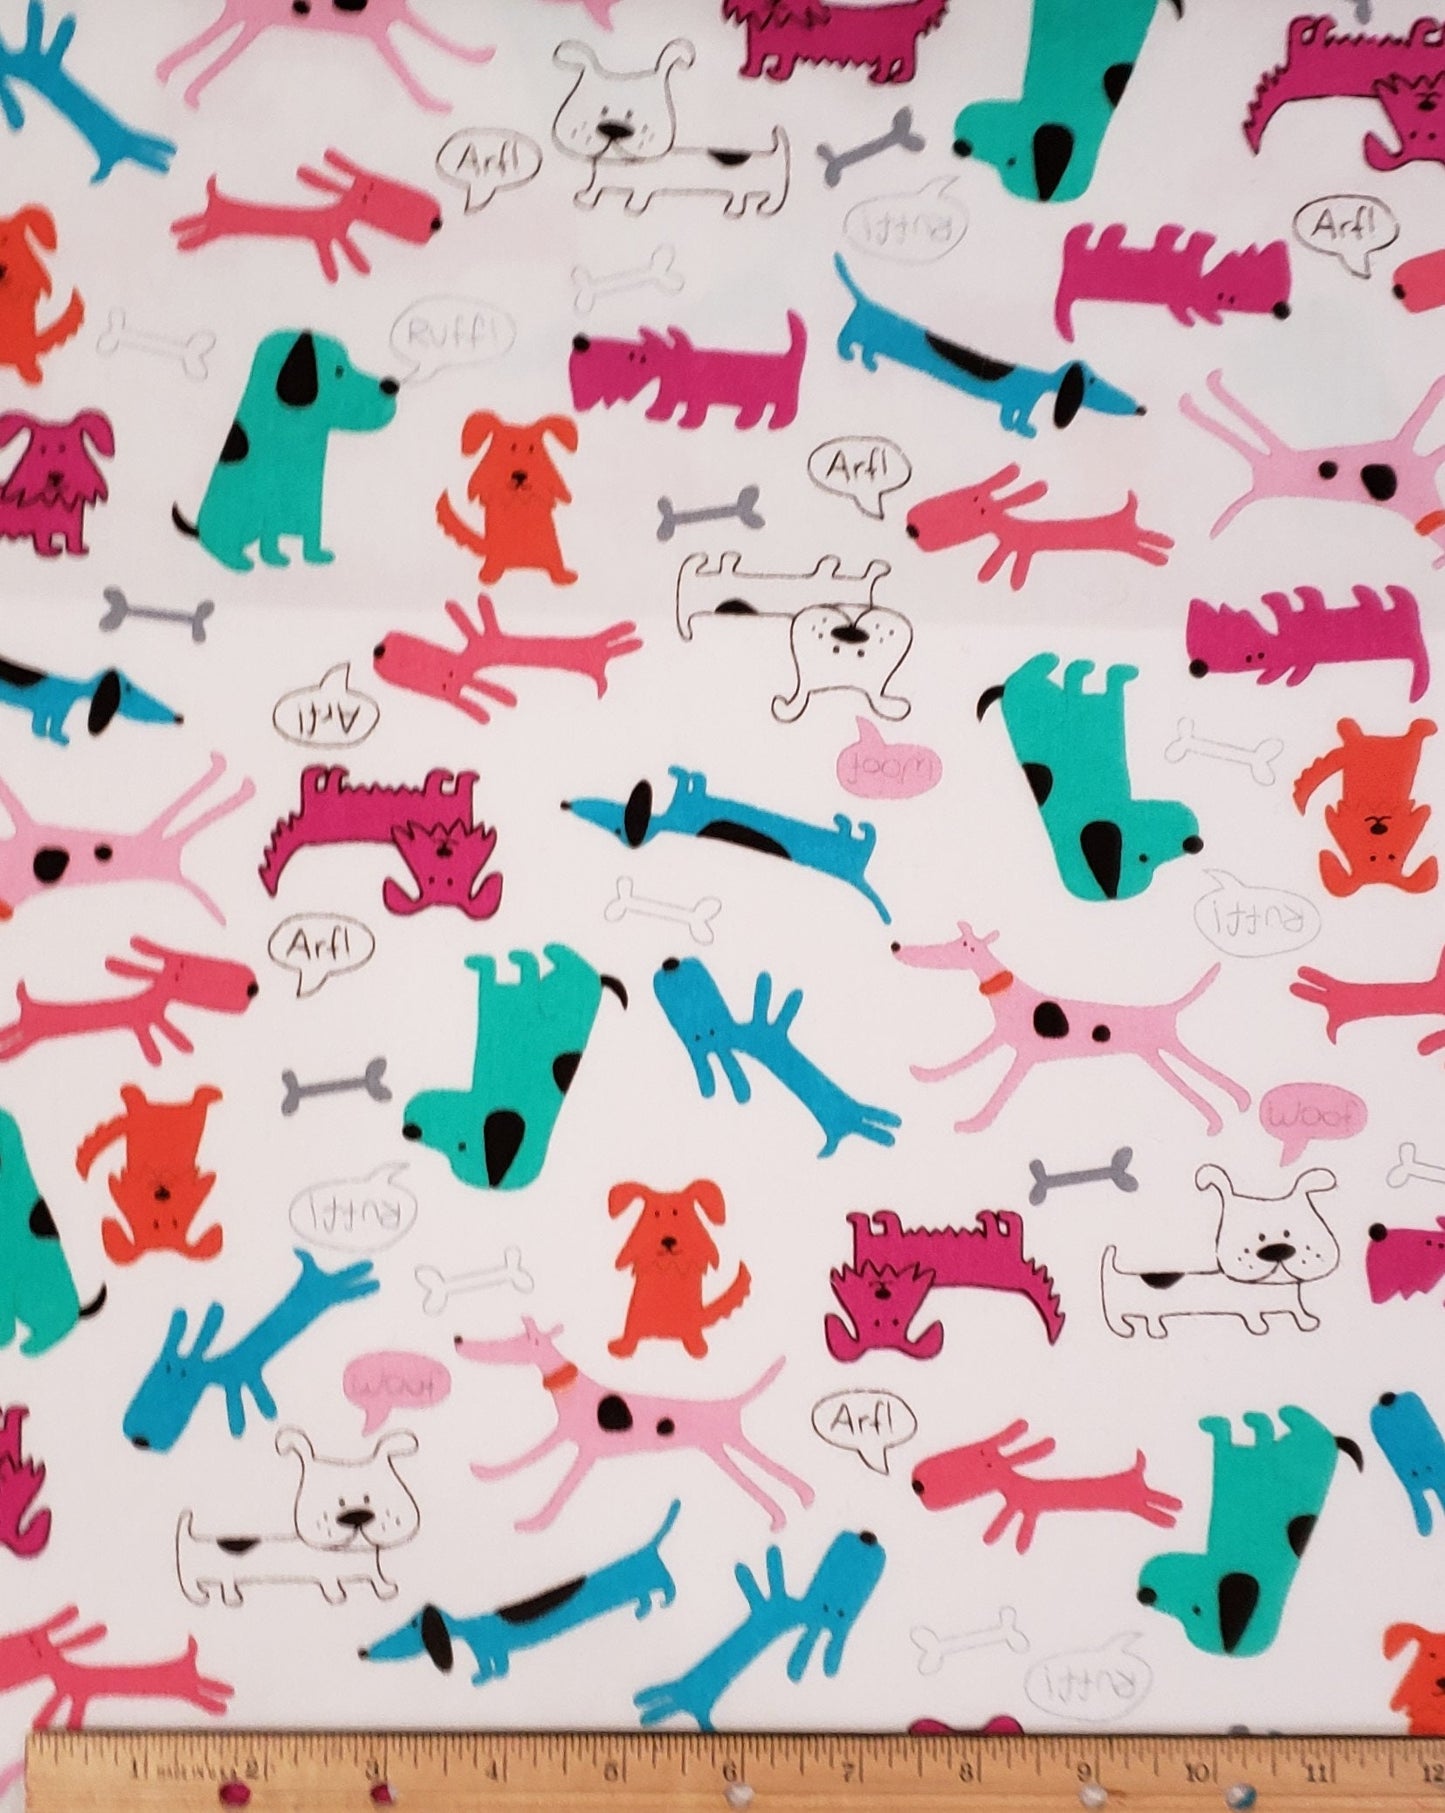 EOB - Style #44882 - White Fabric / Pink, Teal and Turquoise Cartoon-Style Dog Print